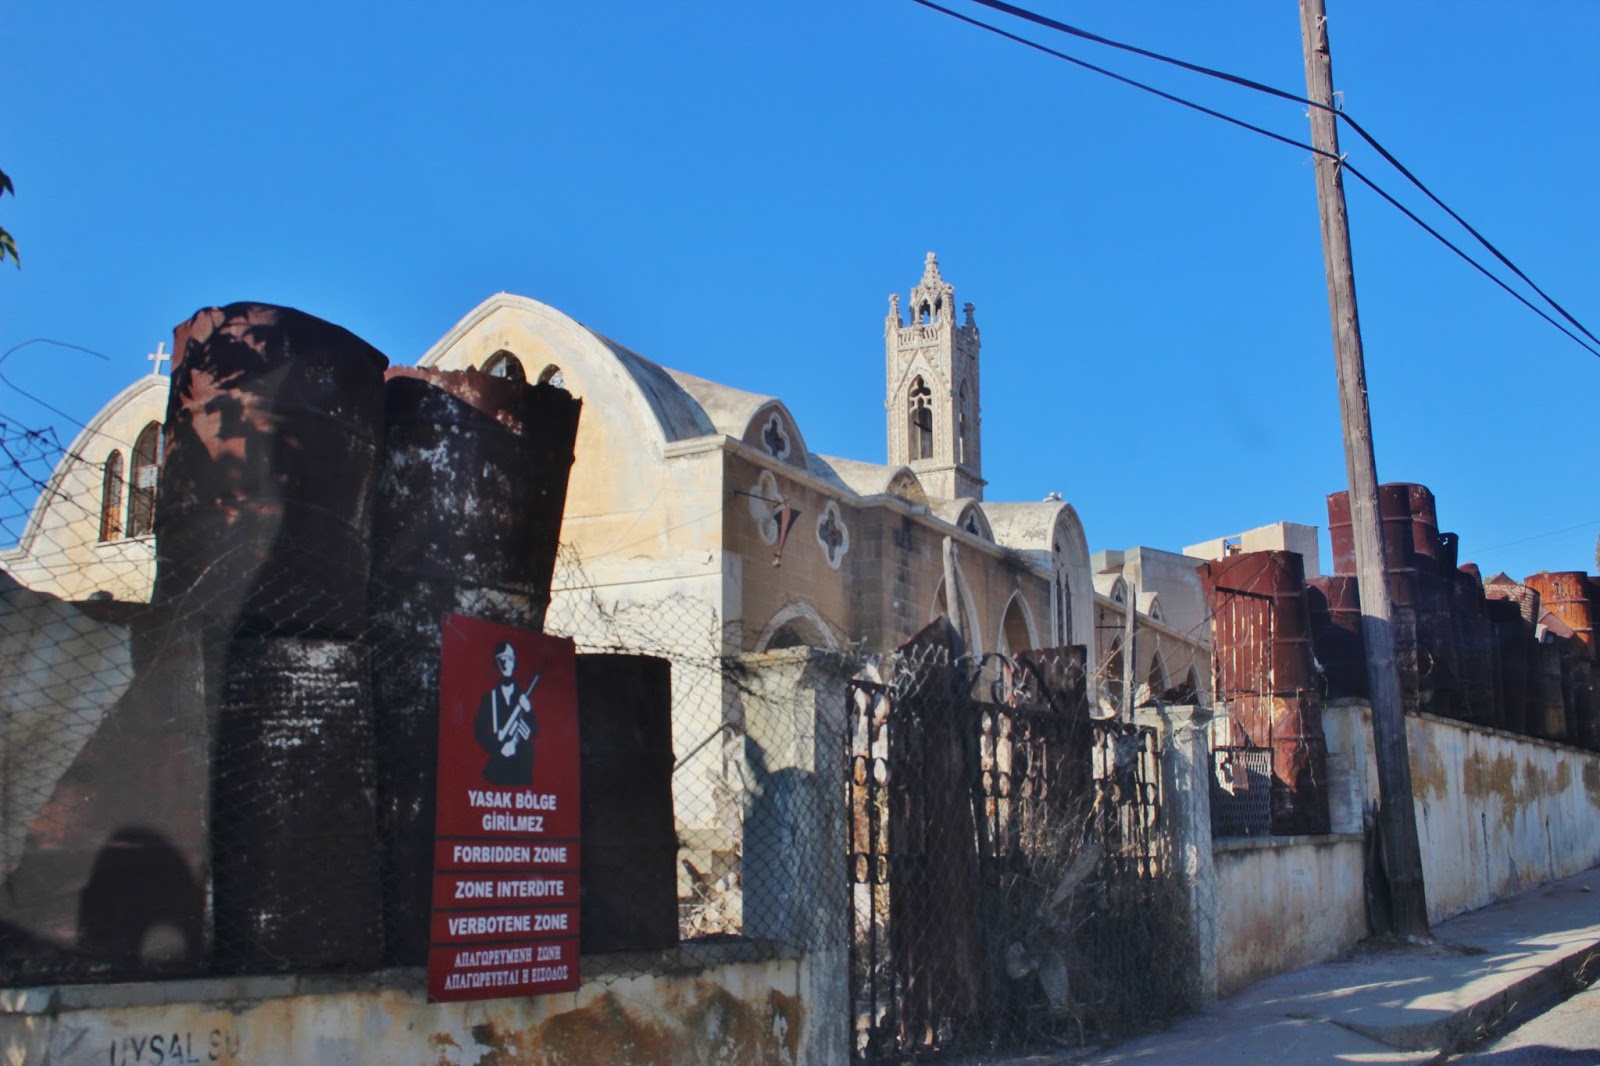 The Holy Zone 1 Churches, Closed city of Famagusta